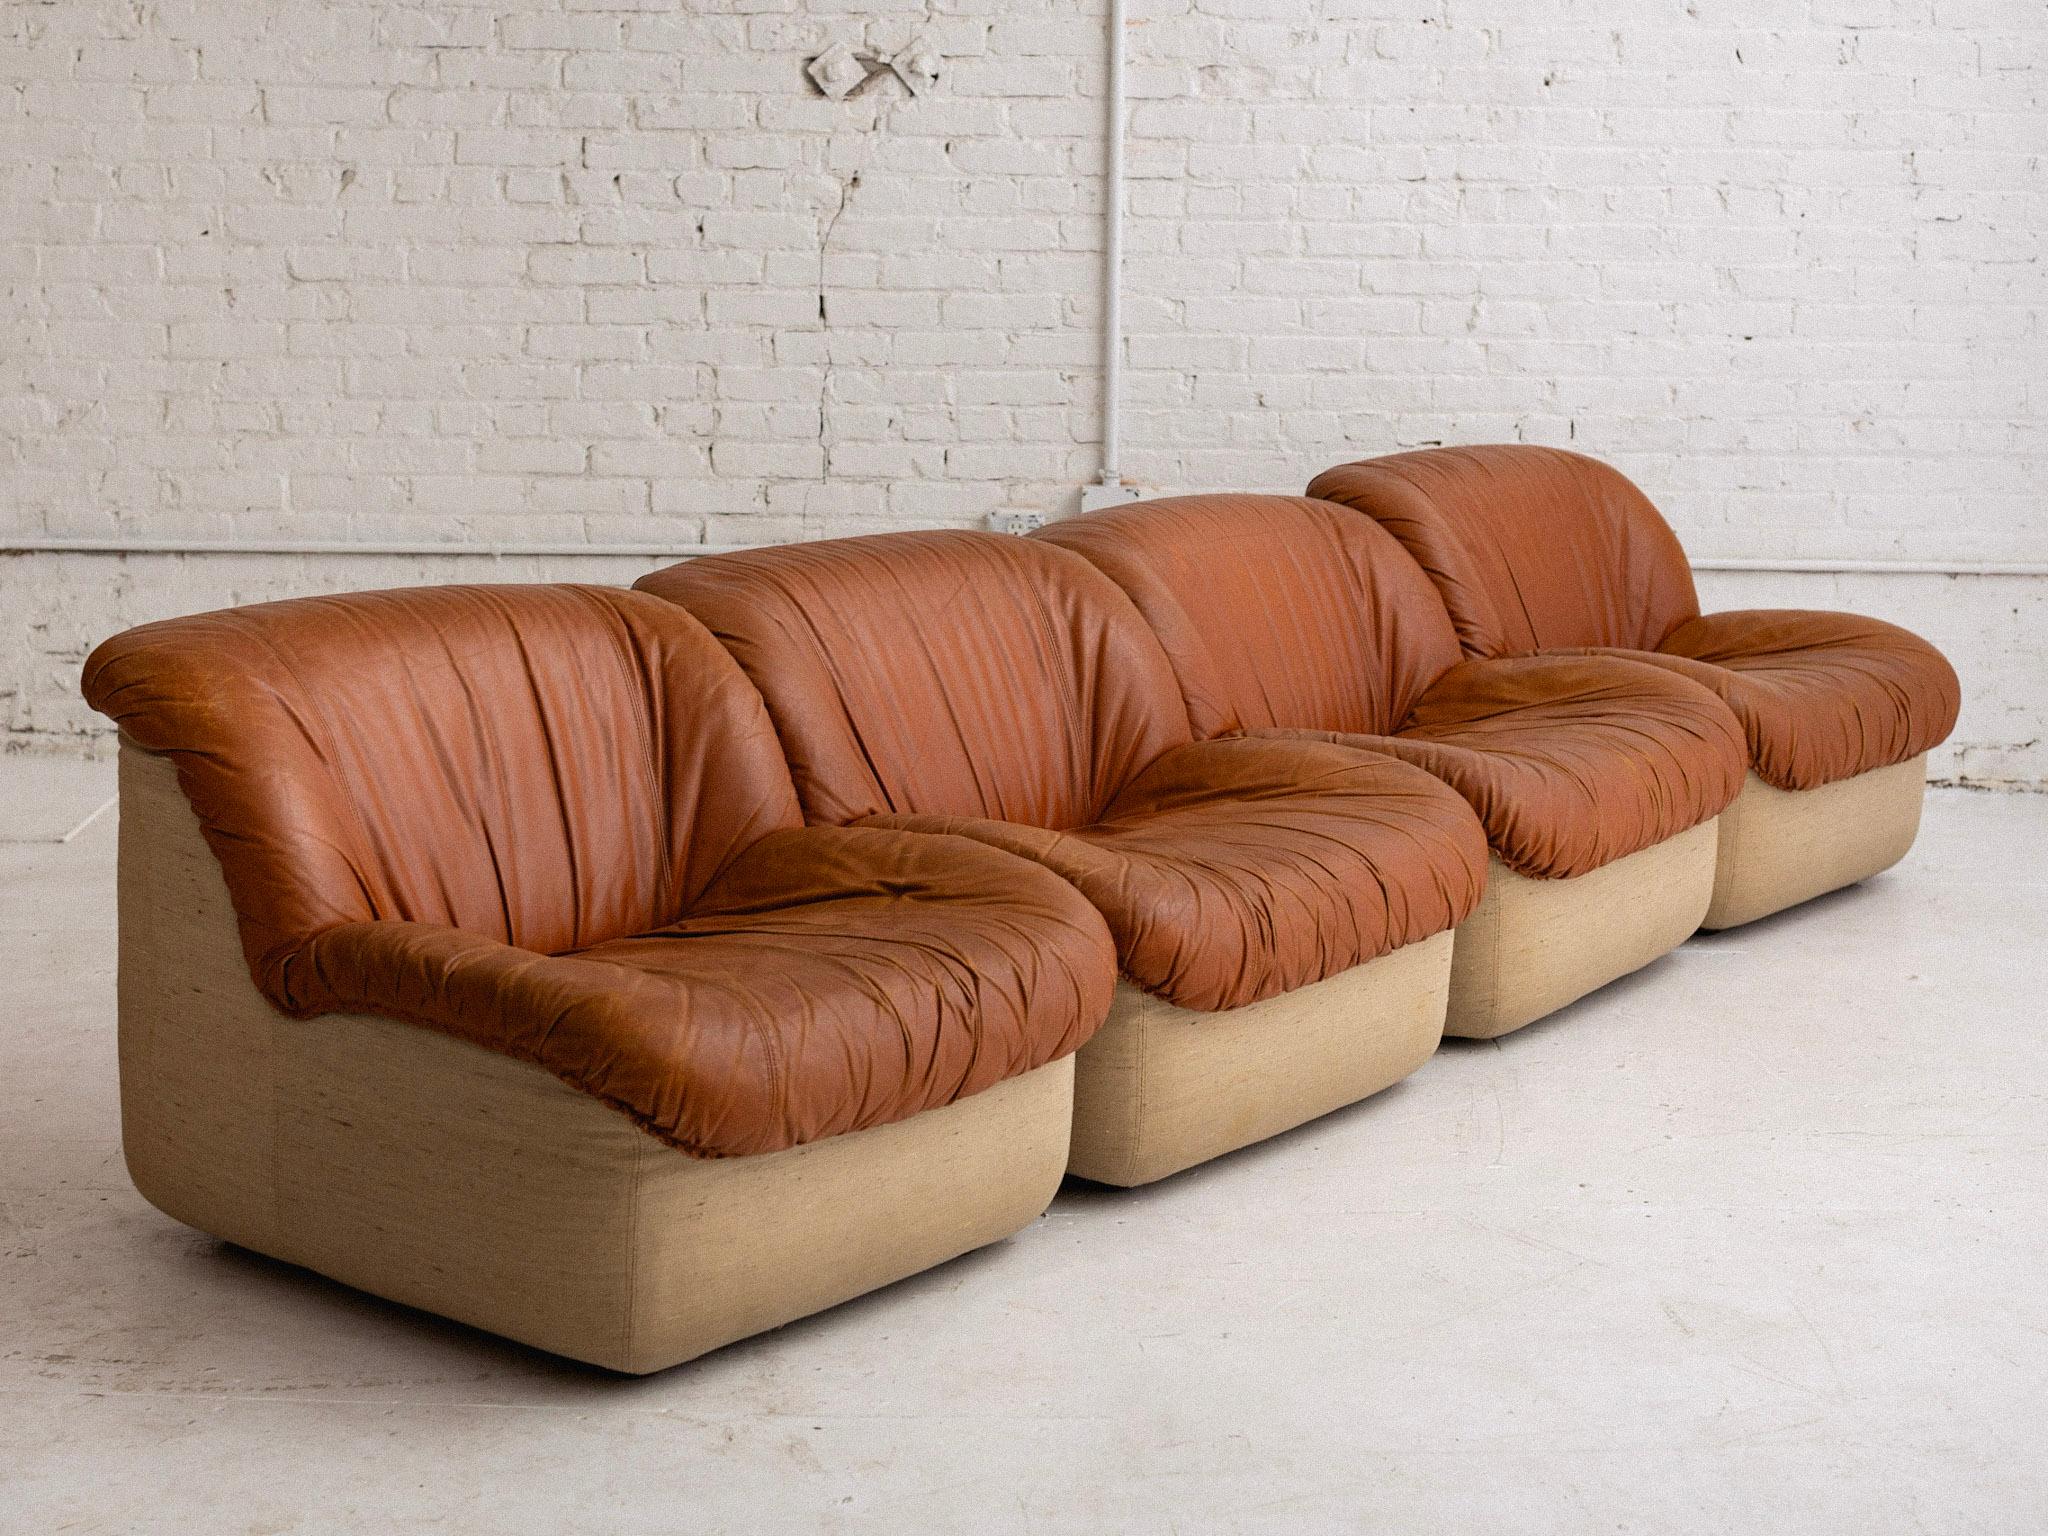 Henning Korch for Swan ‘Caprice’ Leather Chair / Modular Seating In Fair Condition For Sale In Brooklyn, NY